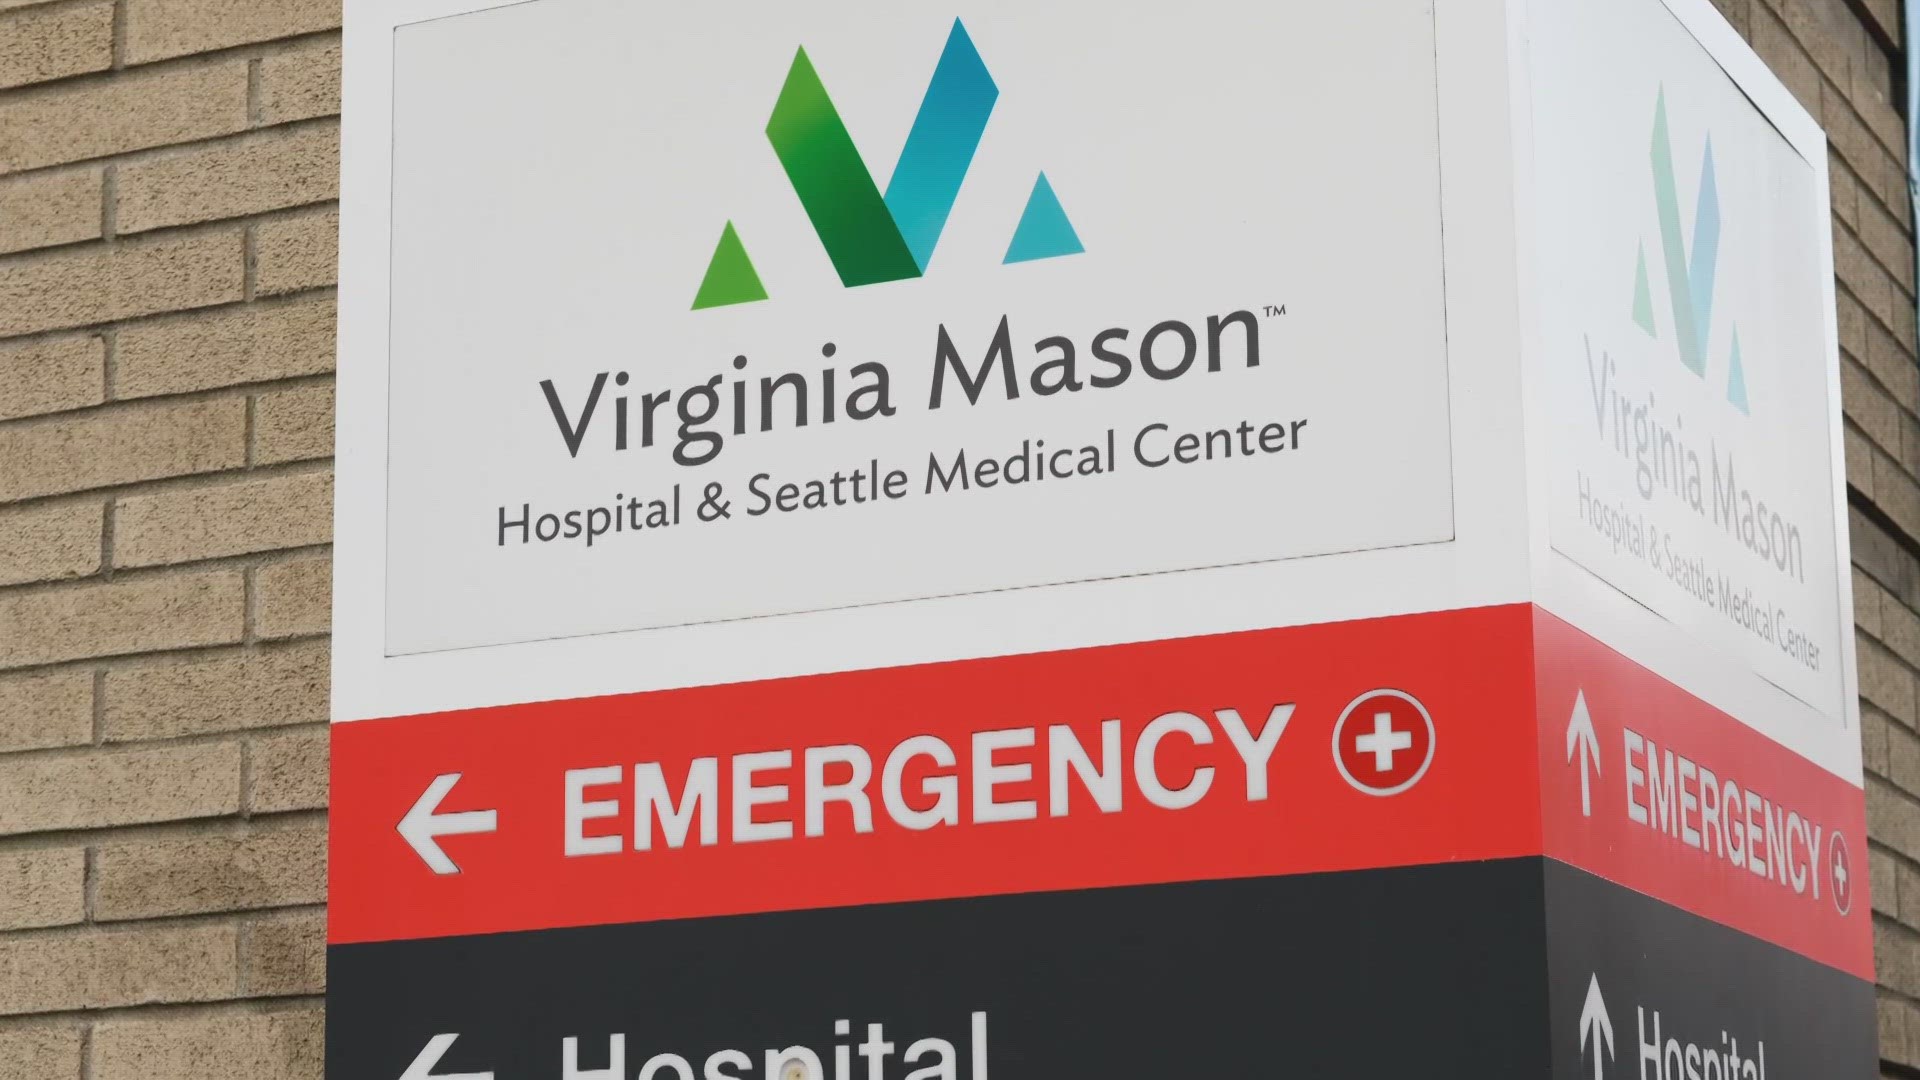 Since October of last year, 33 patients at Virginia Mason Medical Center in Seattle have been infected with Klebsiella bacteria and nine have died from the outbreak.